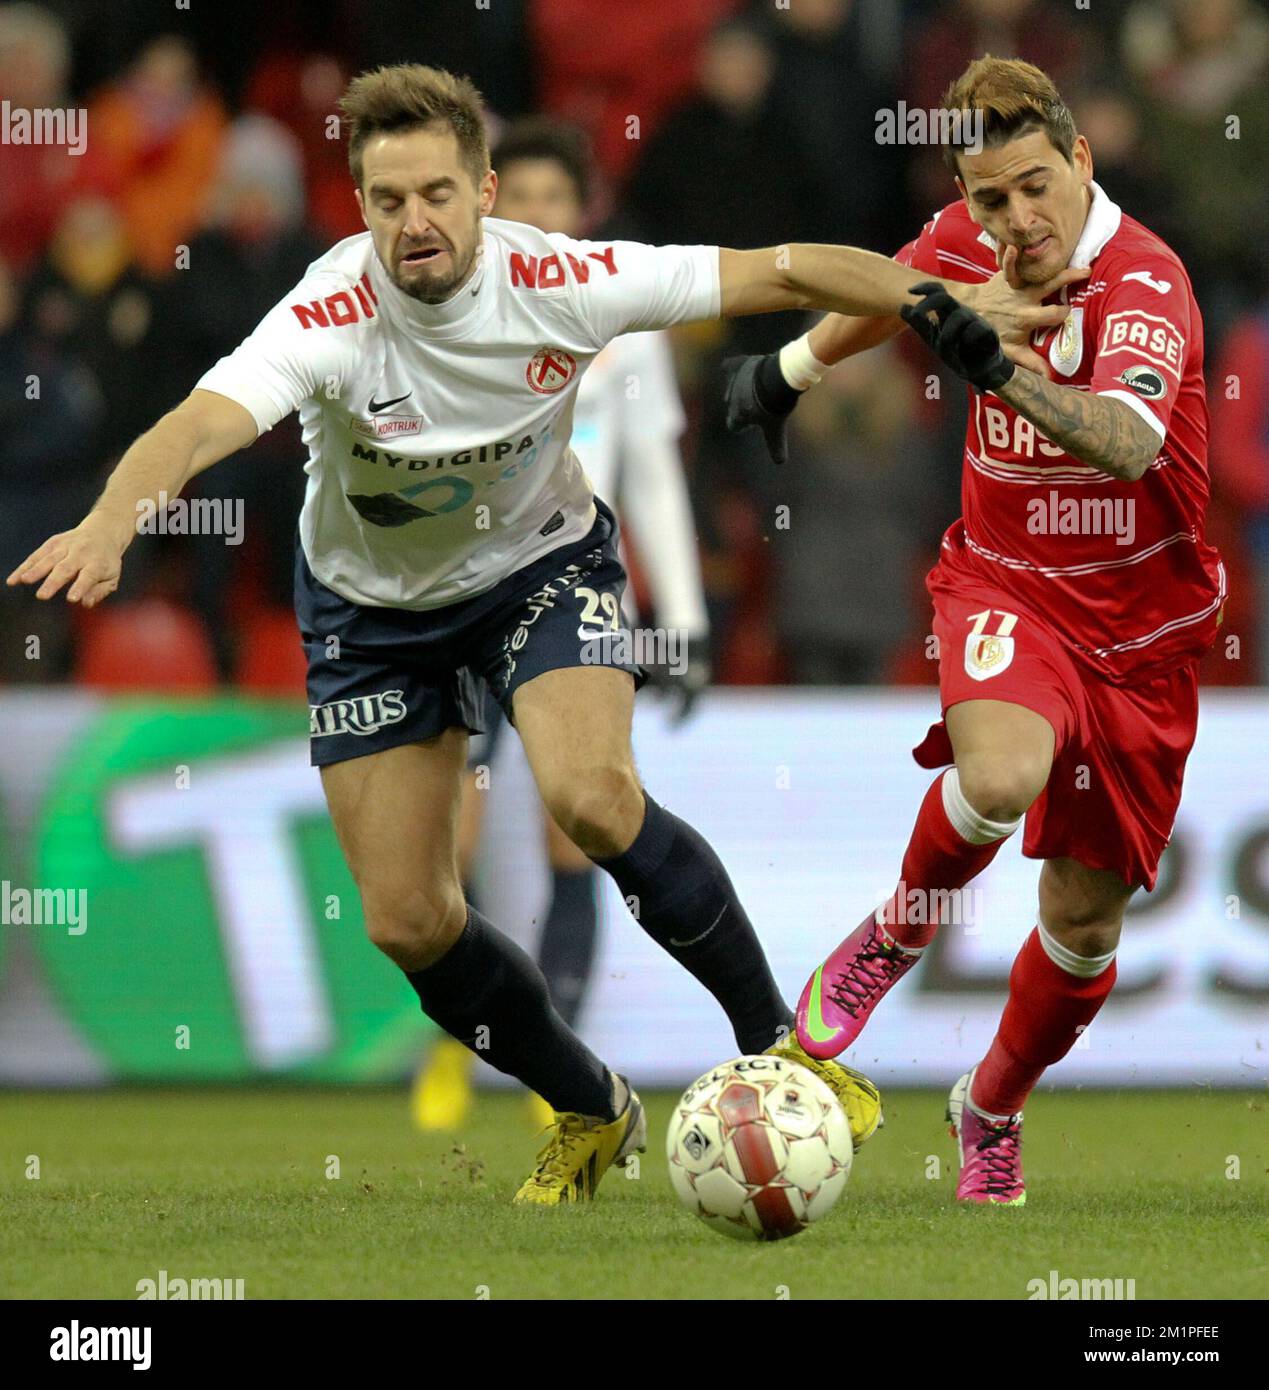 20130125 - LIEGE, BELGIUM: Kortrijk's Romain Reynaud and Standard's Maor Bar Buzaglo fight for the ball during the Jupiler Pro League match between Standard de Liege and KV Kortrijk, in Liege, Friday 25 January 2013, on day 24 of the Belgian soccer championship. BELGA PHOTO VIRGINIE LEFOUR Stock Photo